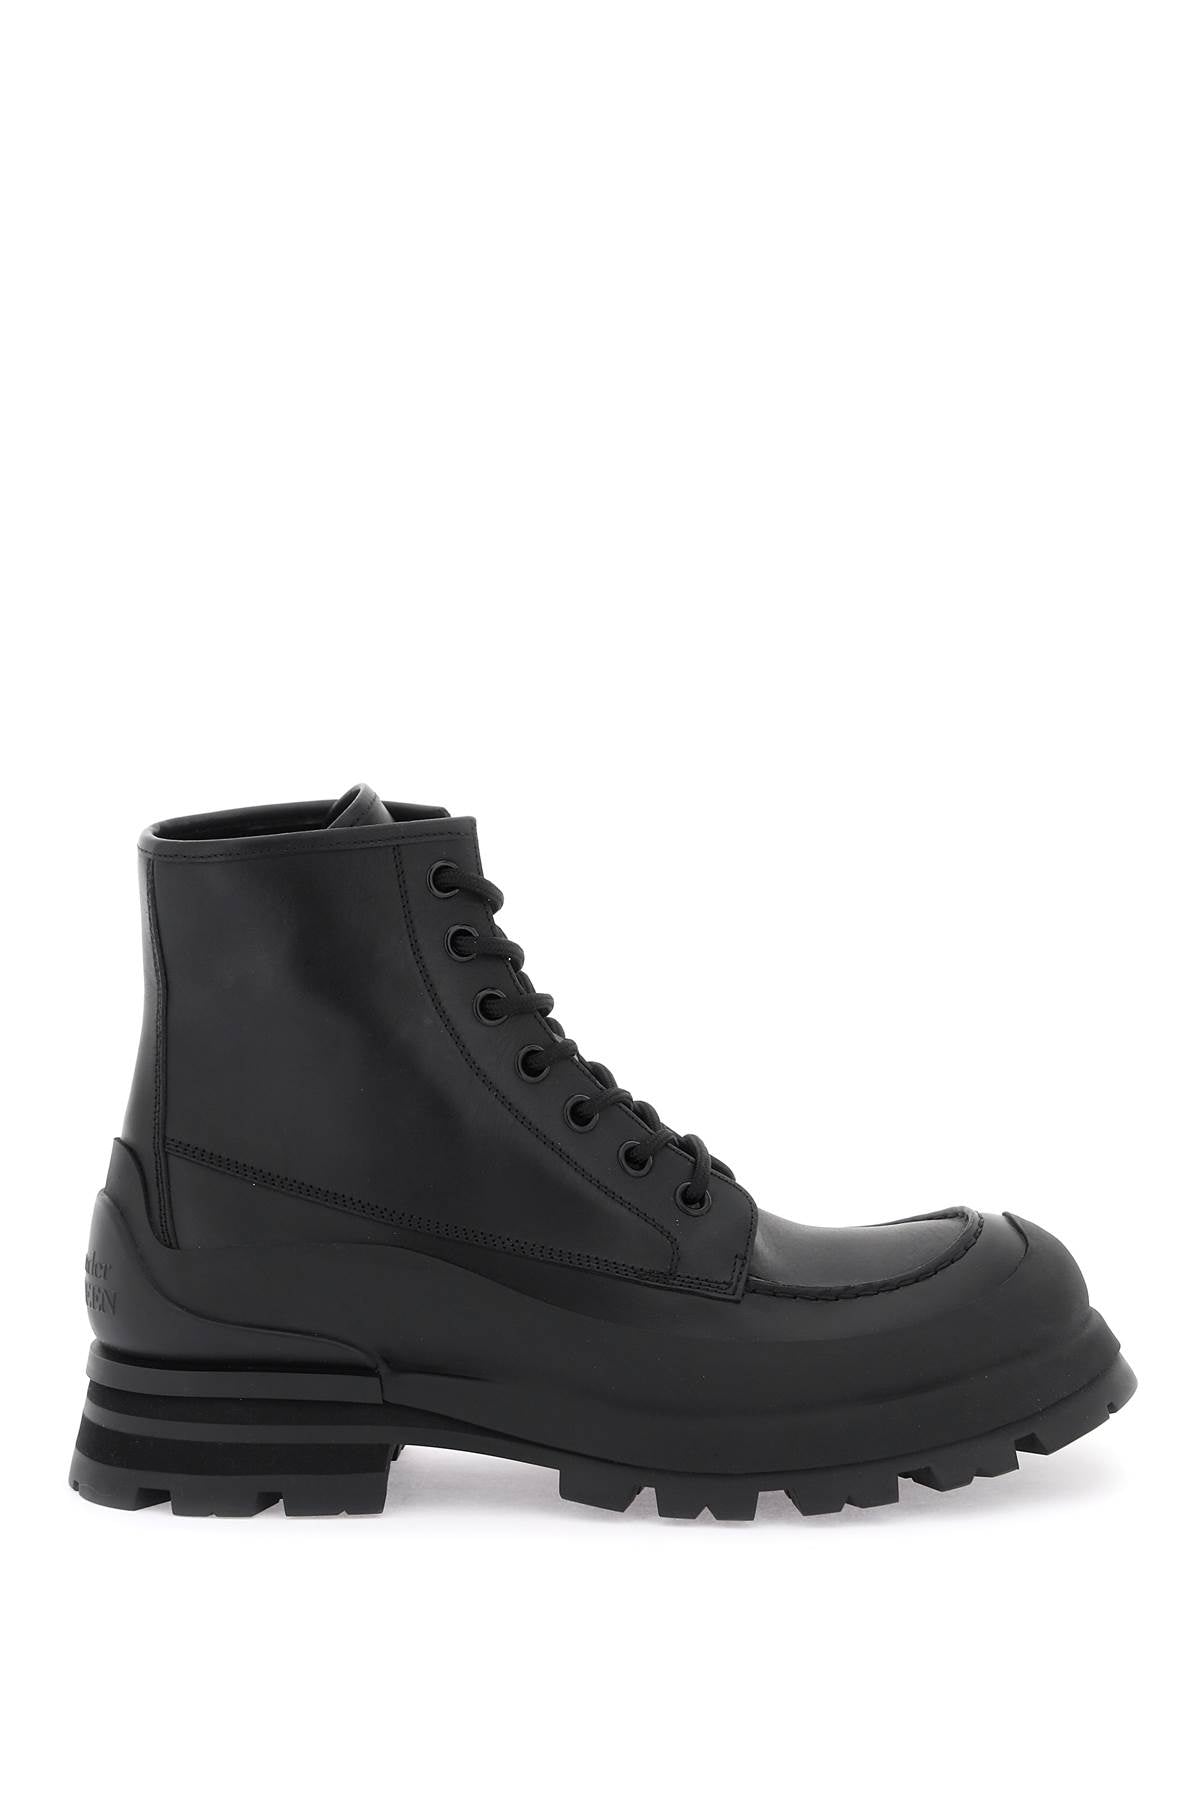 Alexander mcqueen leather ankle boots-0